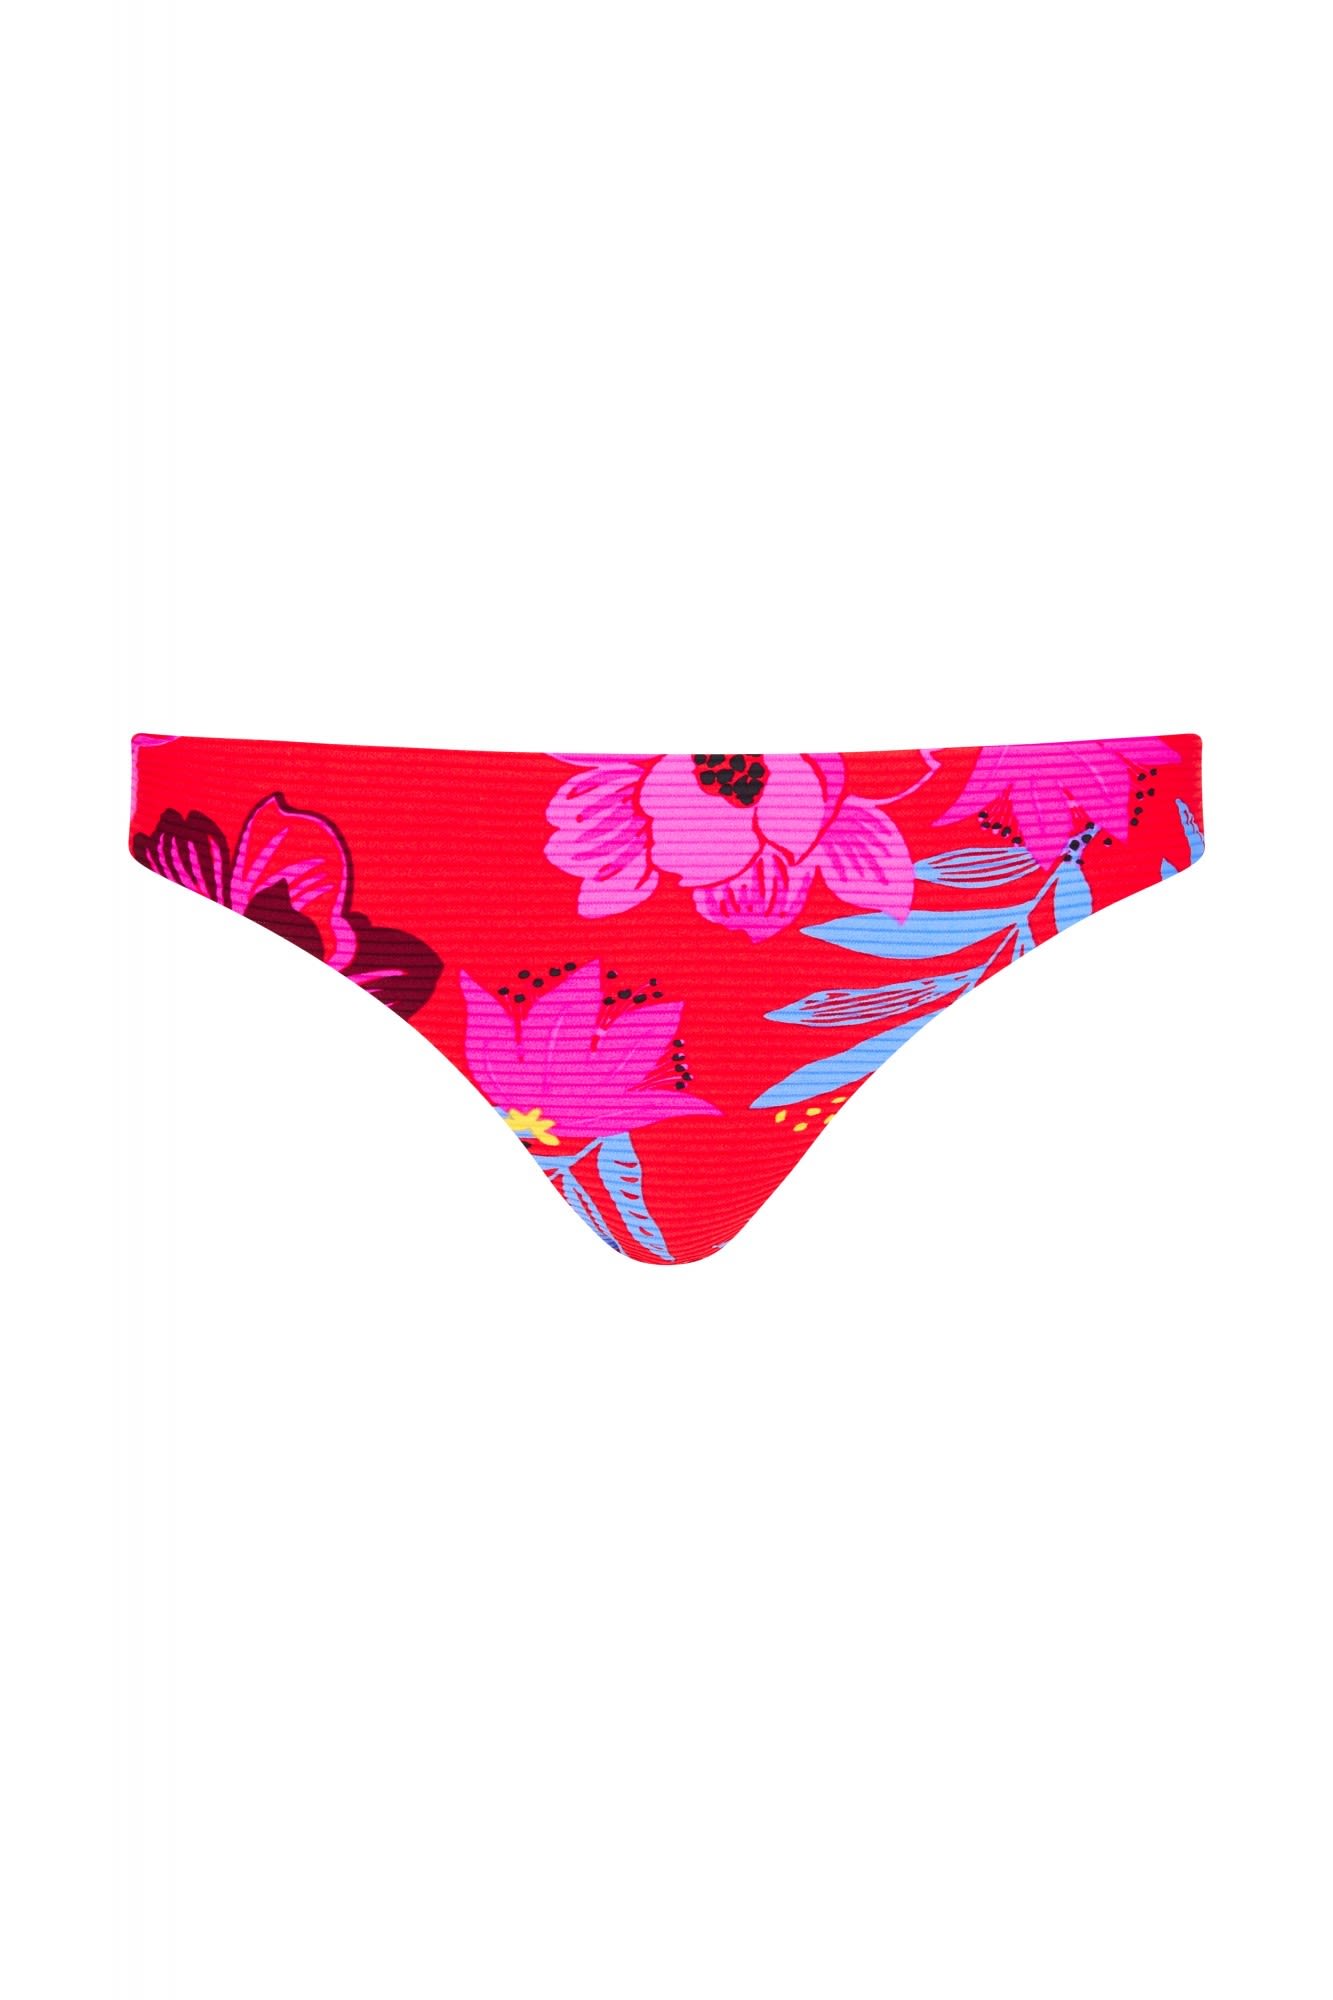 Seafolly ON Vacation Hipster Pink- Female Unterteile- Grsse AUS 14 - EU 40 - Farbe Chili unter Seafolly